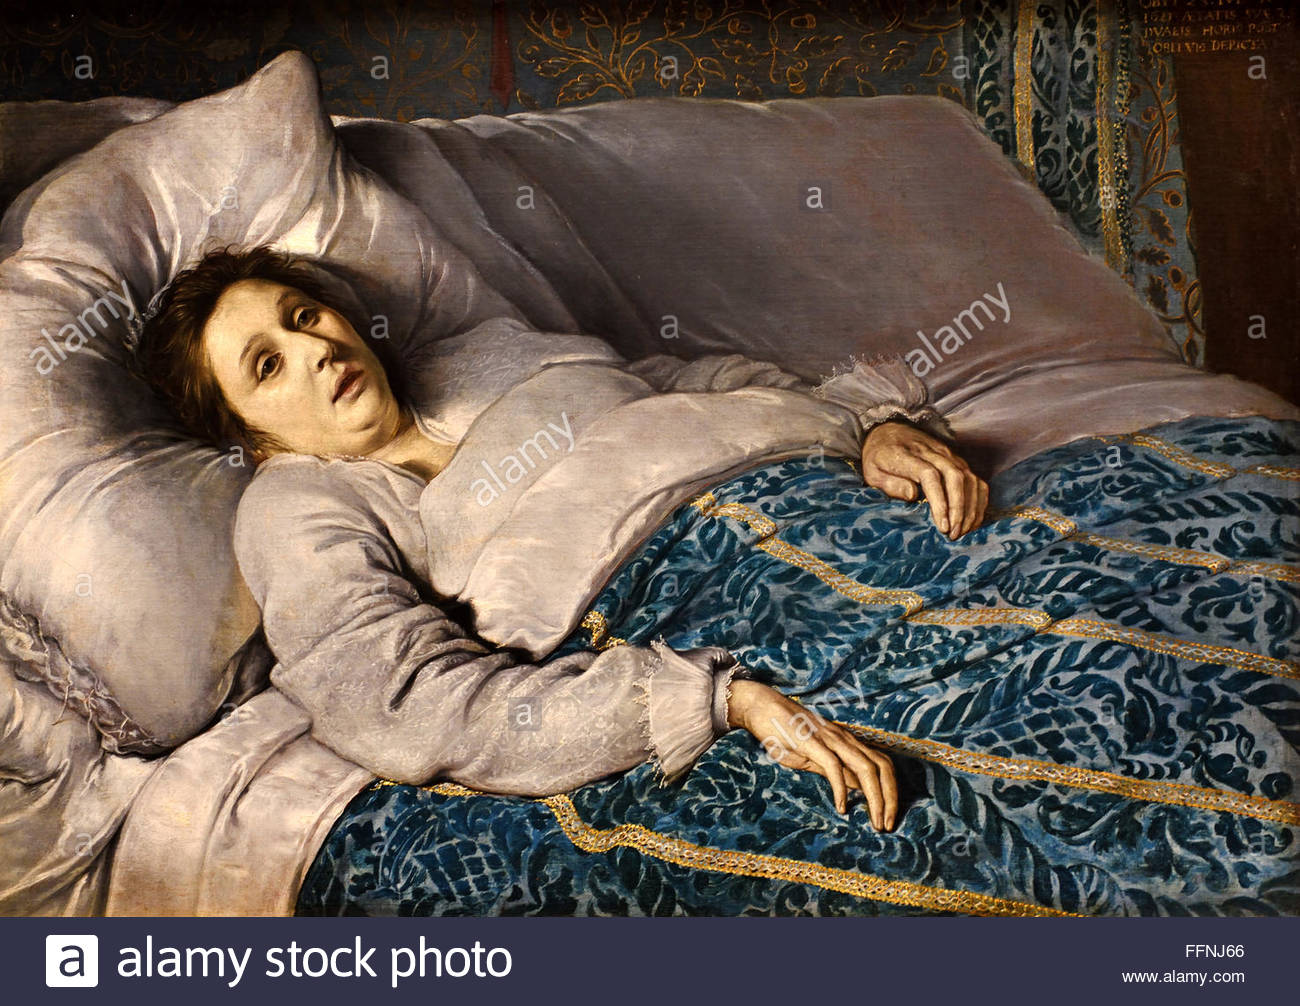 young-woman-on-her-death-bed-anonymous-flemish-school-1621-belgian-FFNJ66.jpg